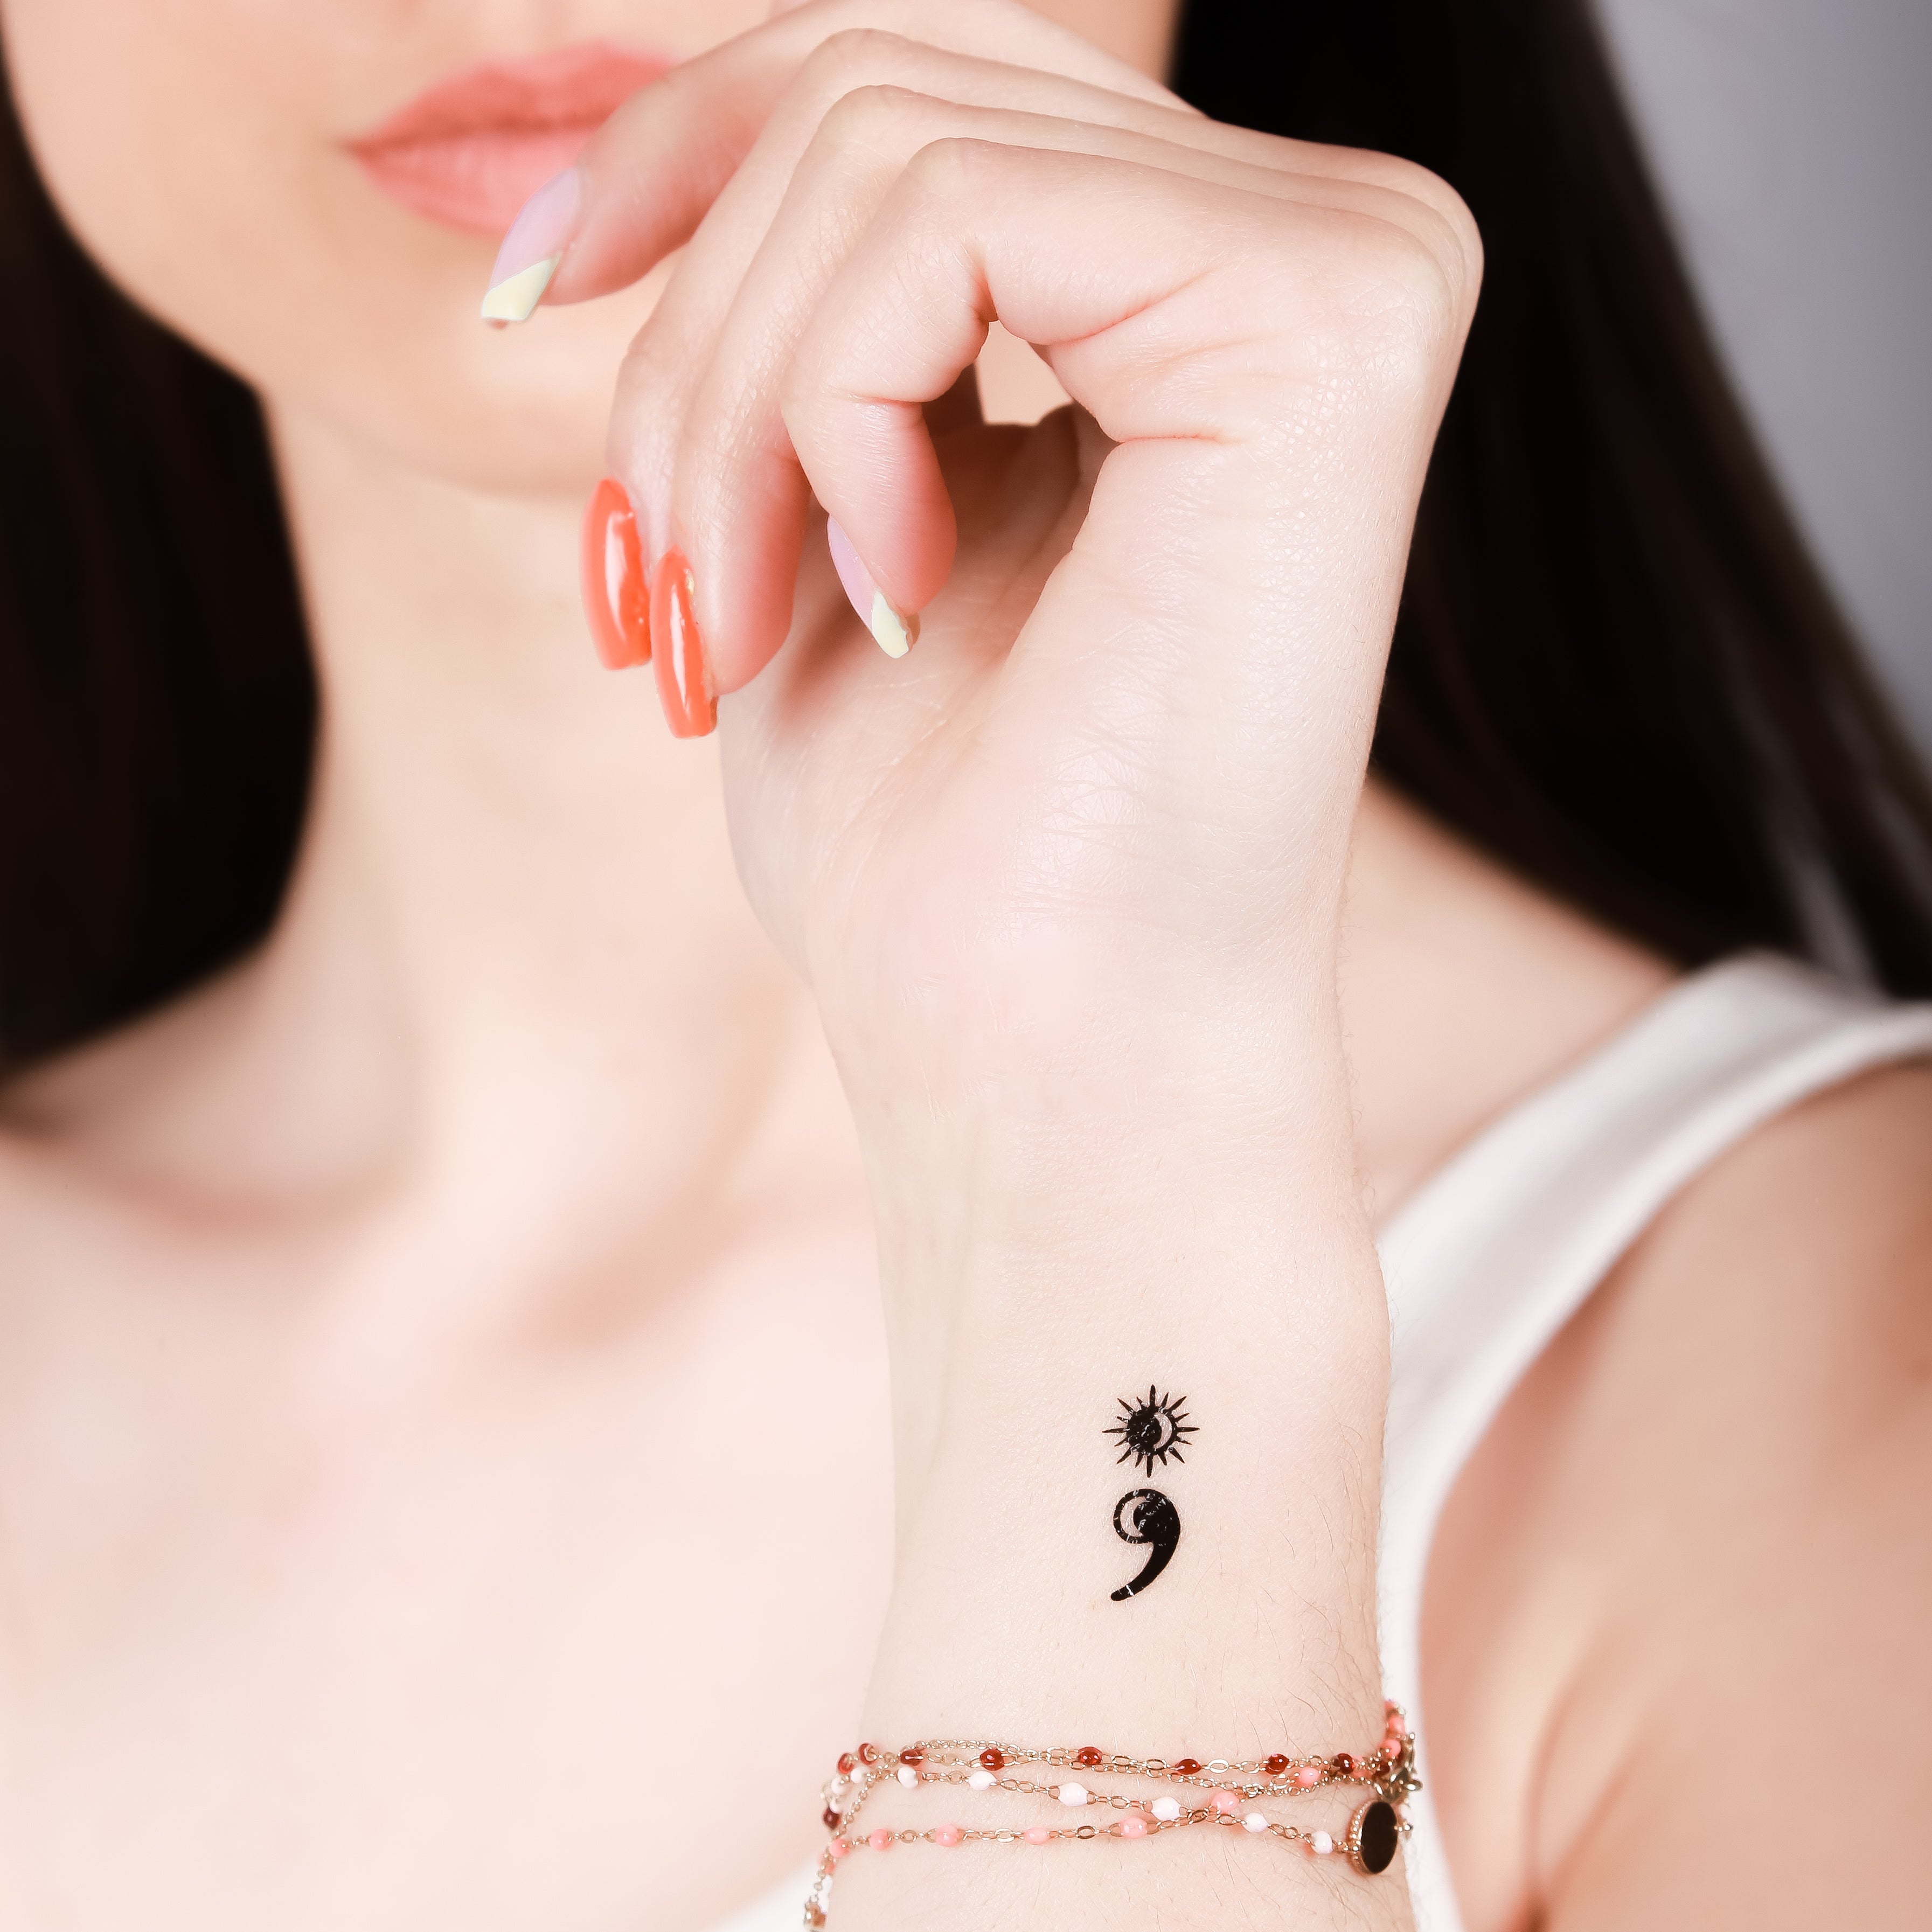 What Does a Semicolon Tattoo Mean?